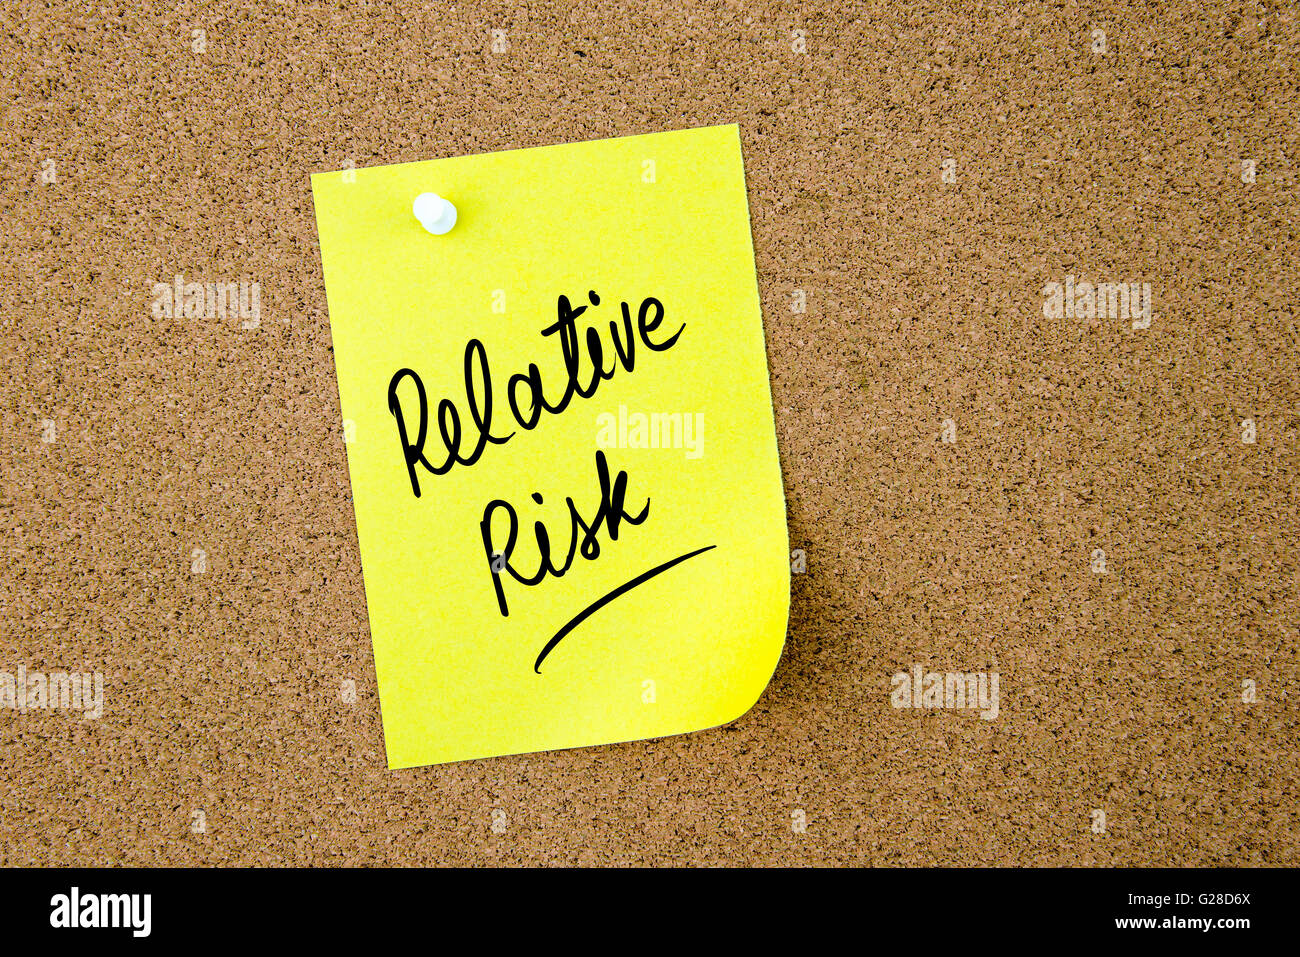 Relative Risk written on yellow paper note pinned on cork board with white thumbtack, copy space available Stock Photo